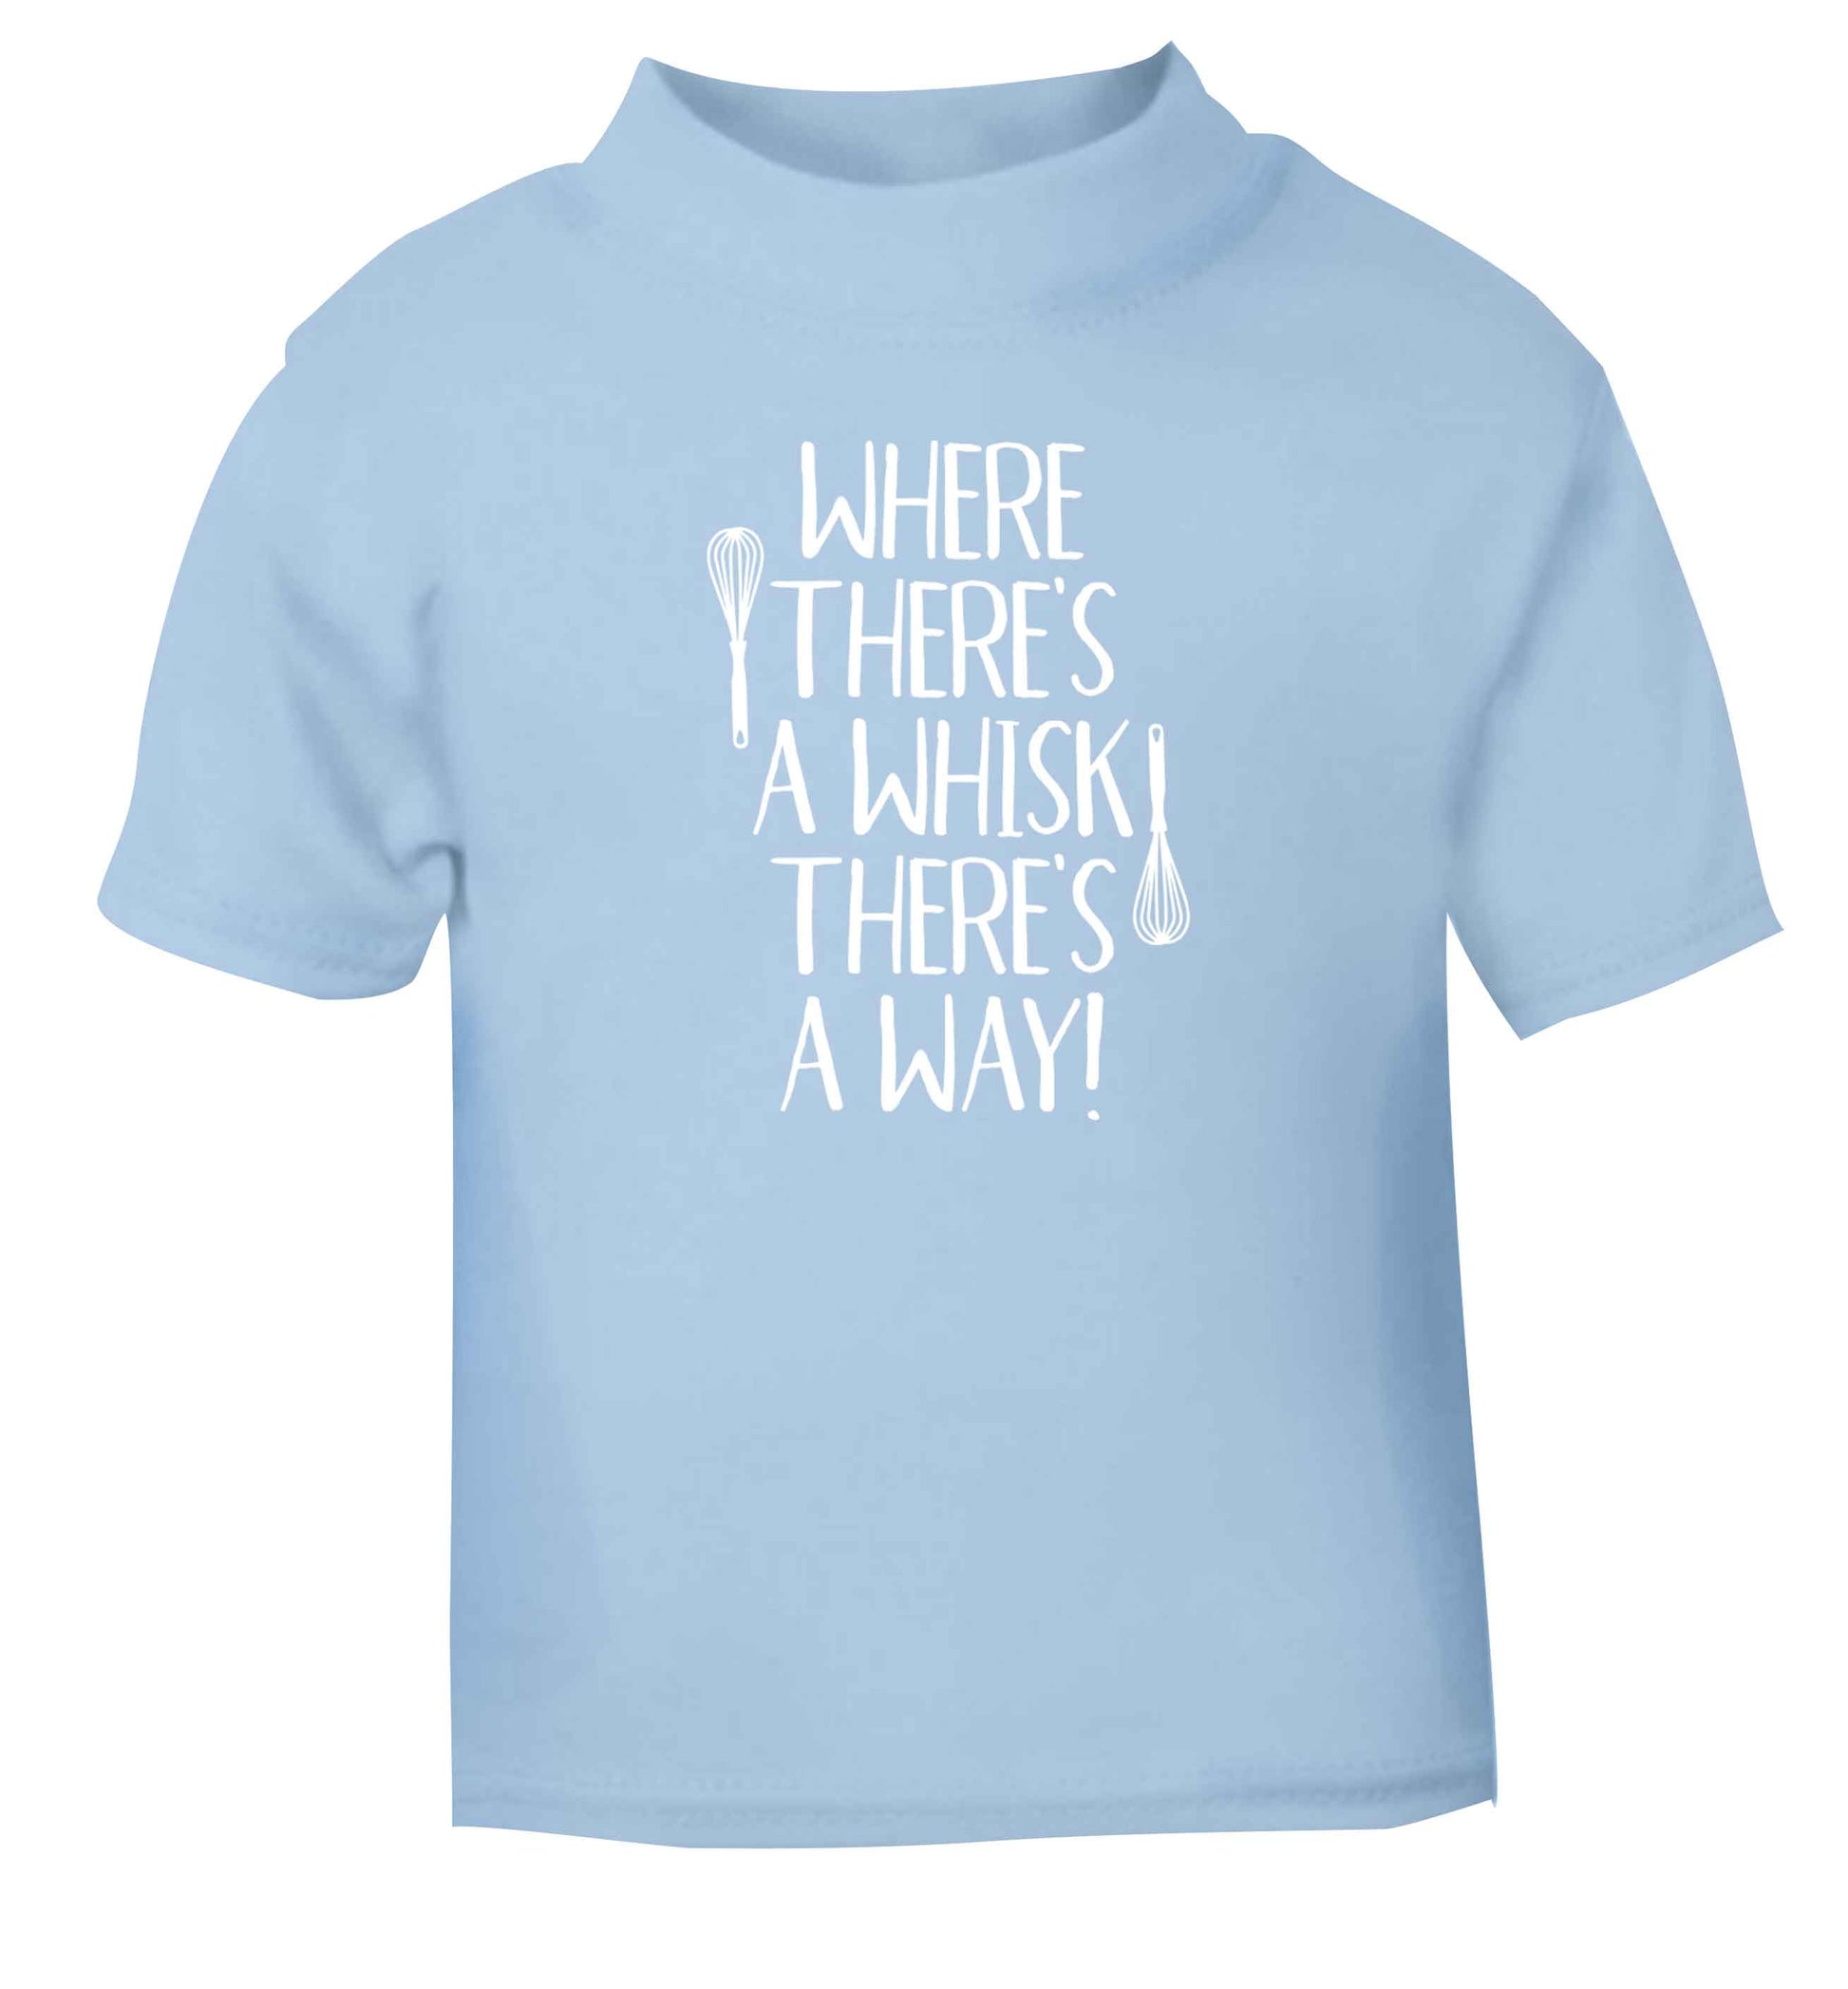 Where there's a whisk there's a way light blue Baby Toddler Tshirt 2 Years